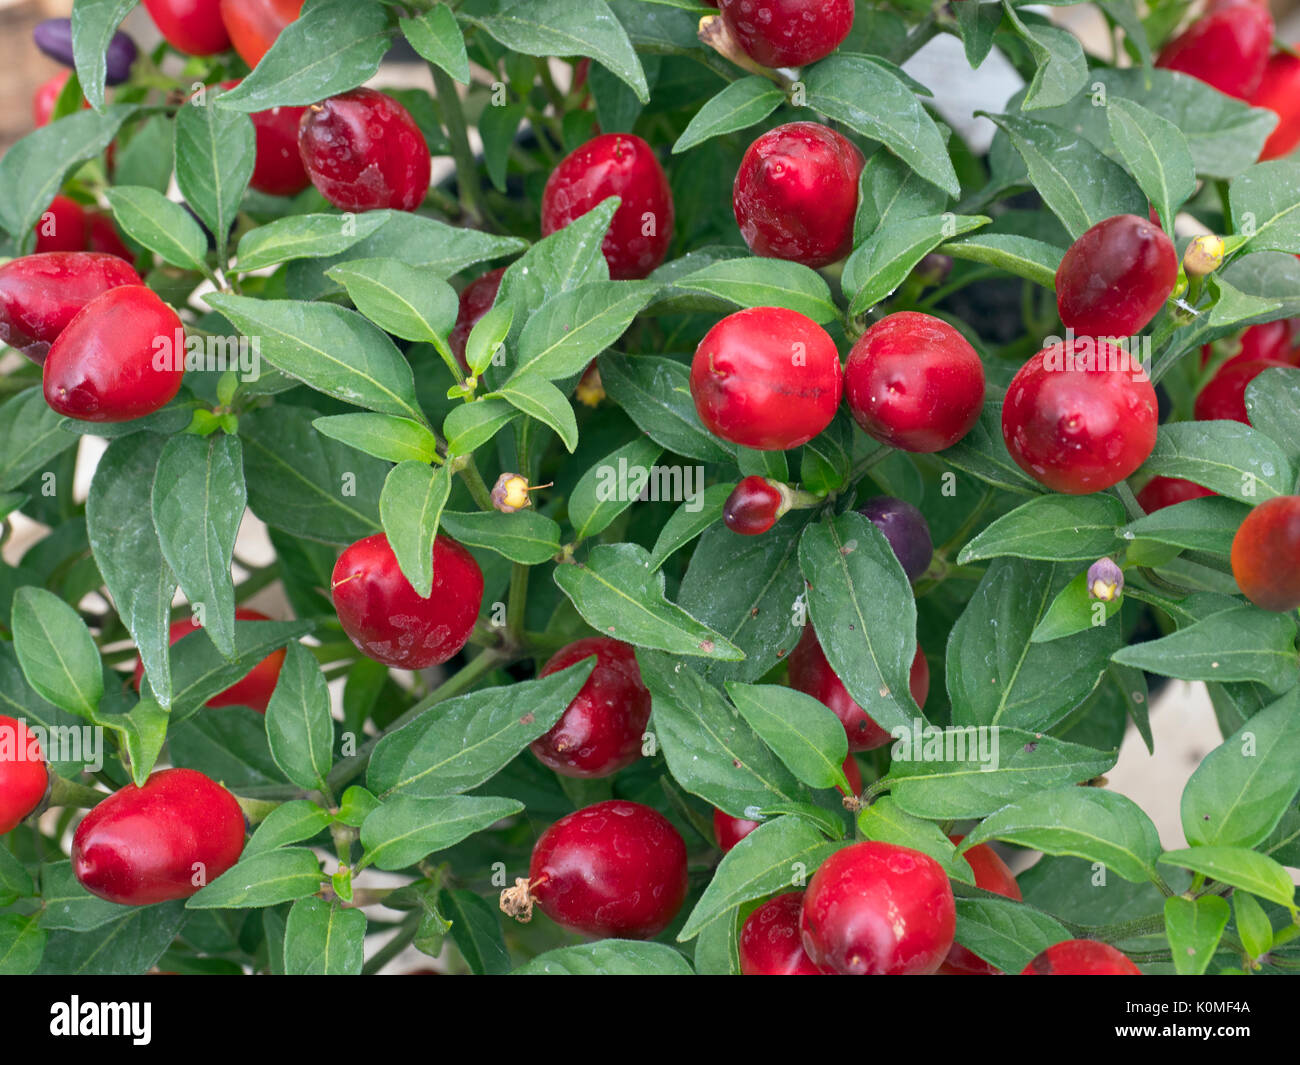 Scotch bonnet also known as bonney peppers or Caribbean red peppers Stock Photo